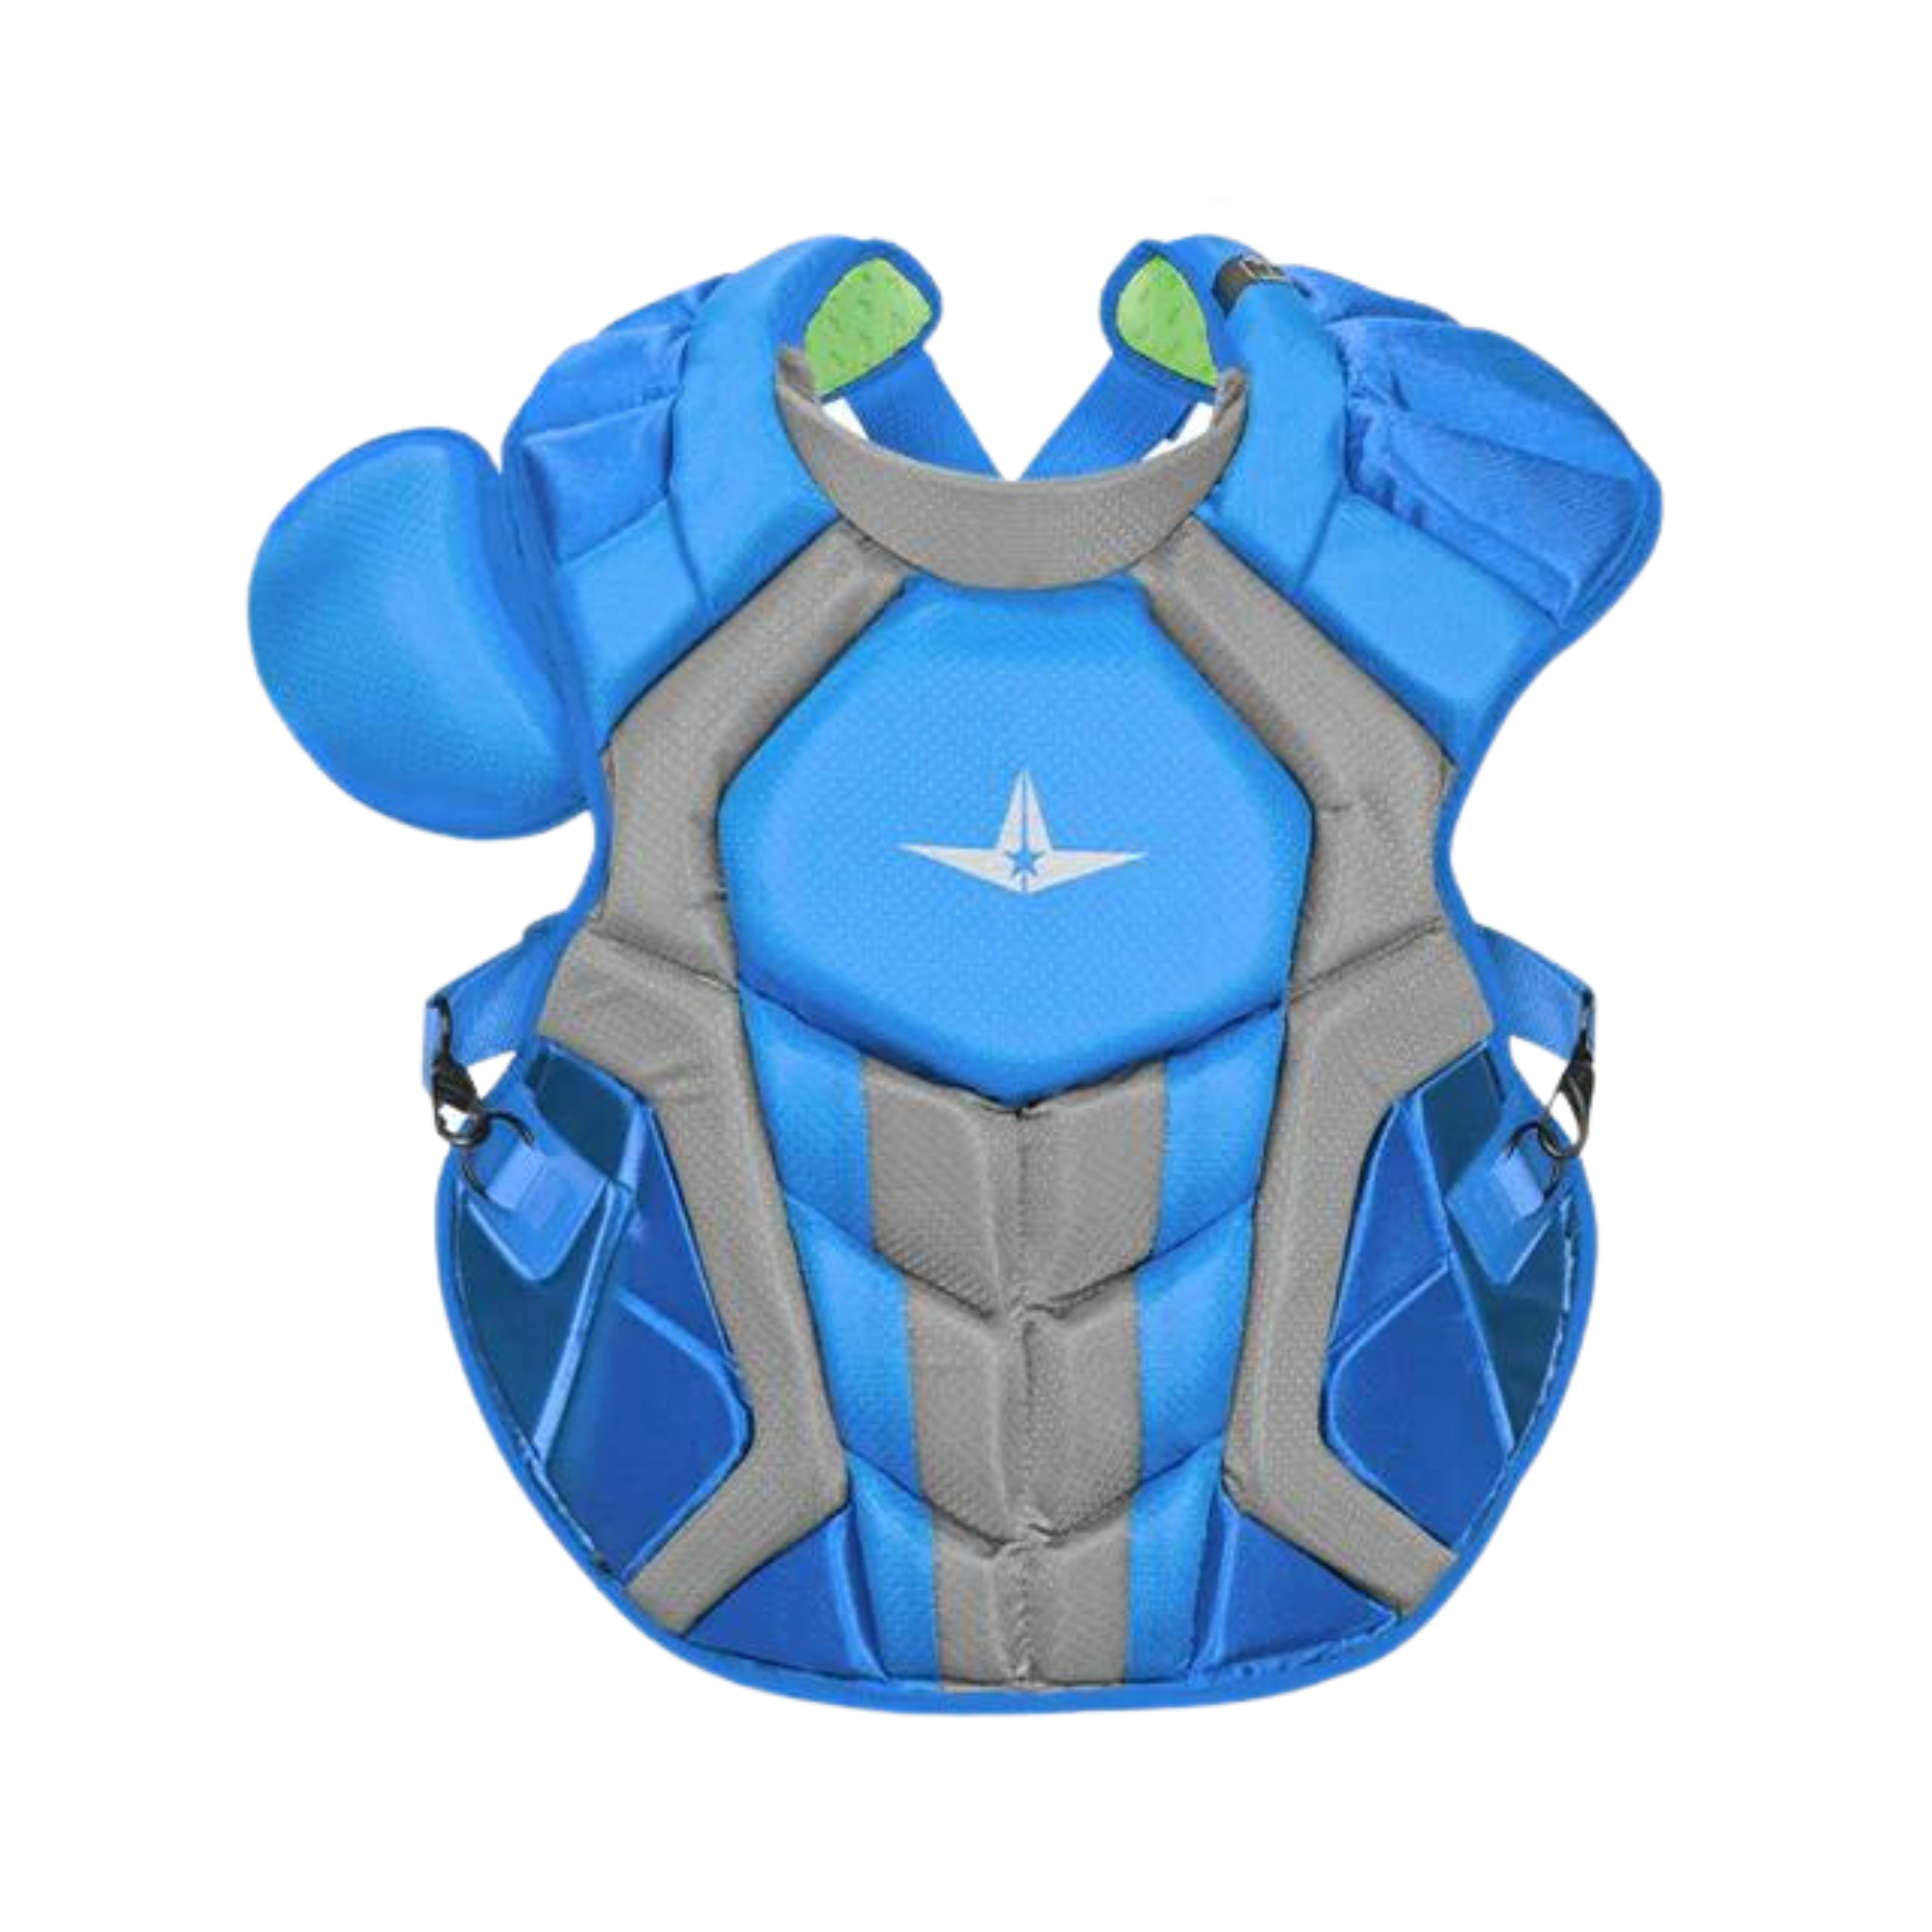 All-Star S7 Chest Protector / Meets NOCSAE / Two Tone / Adult